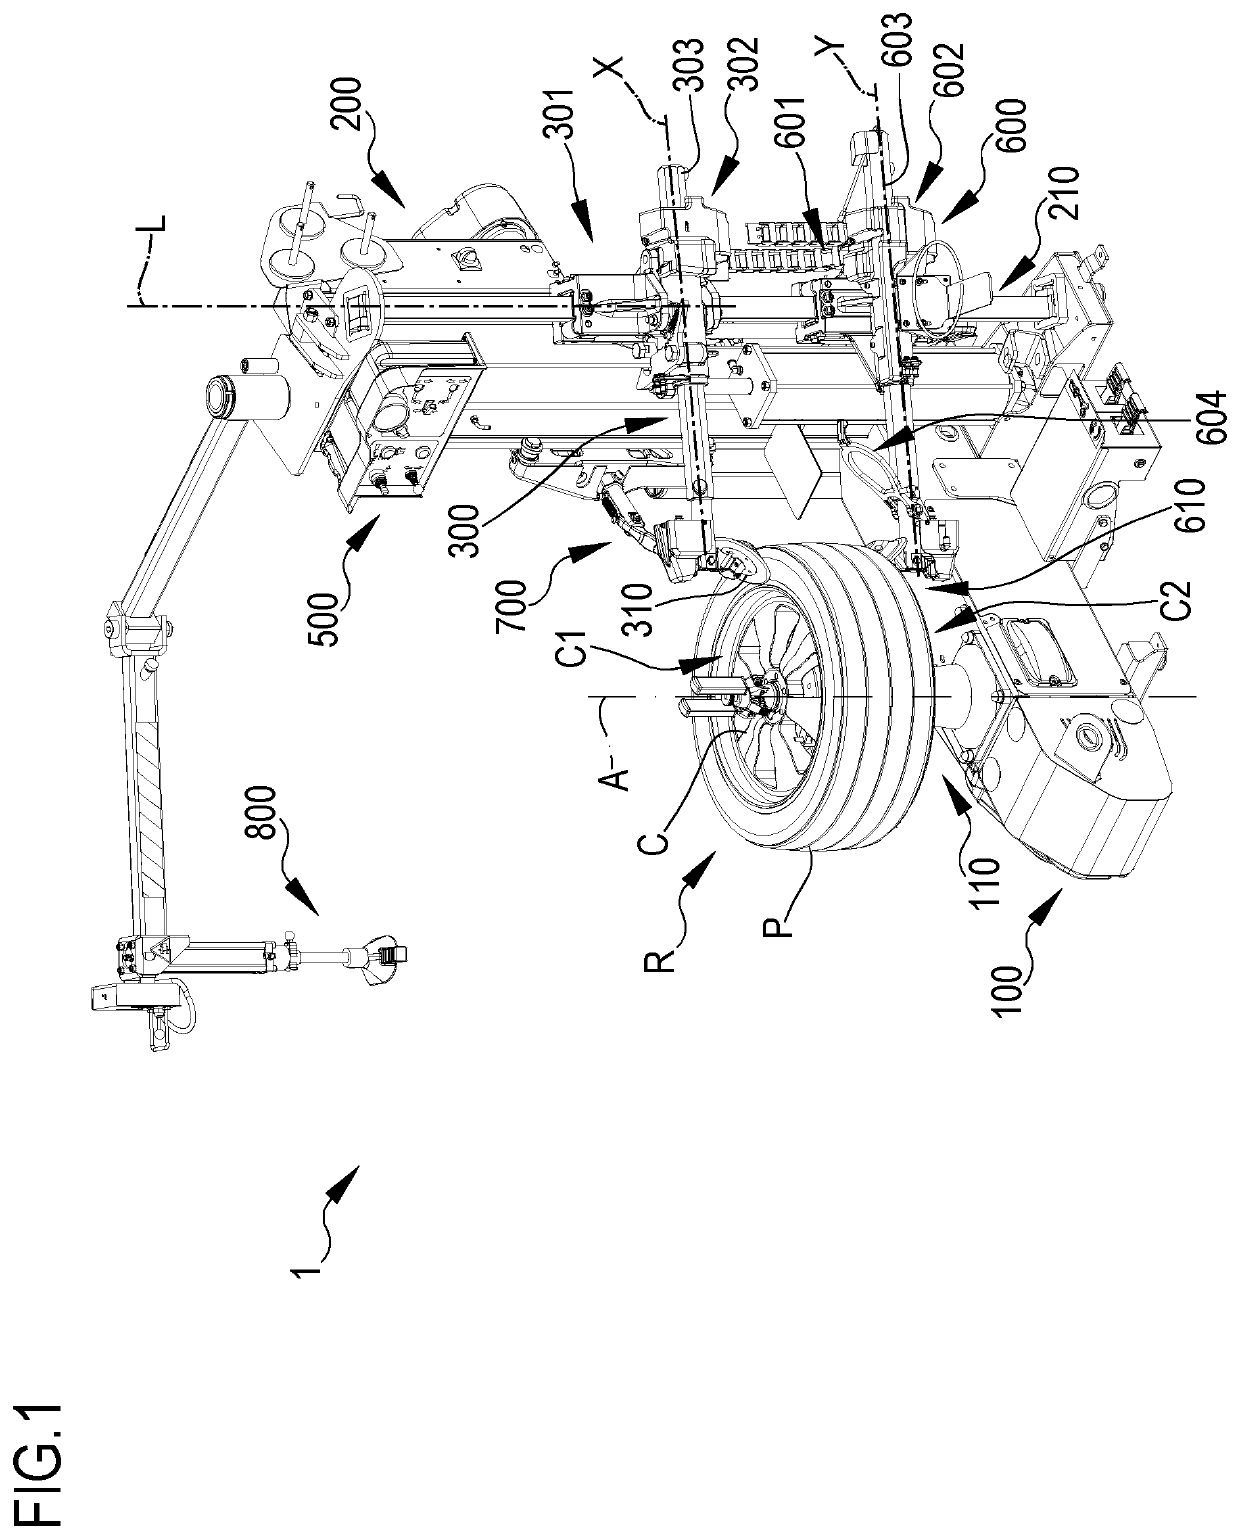 Tyre-removal apparatus with automatically pivoting tool